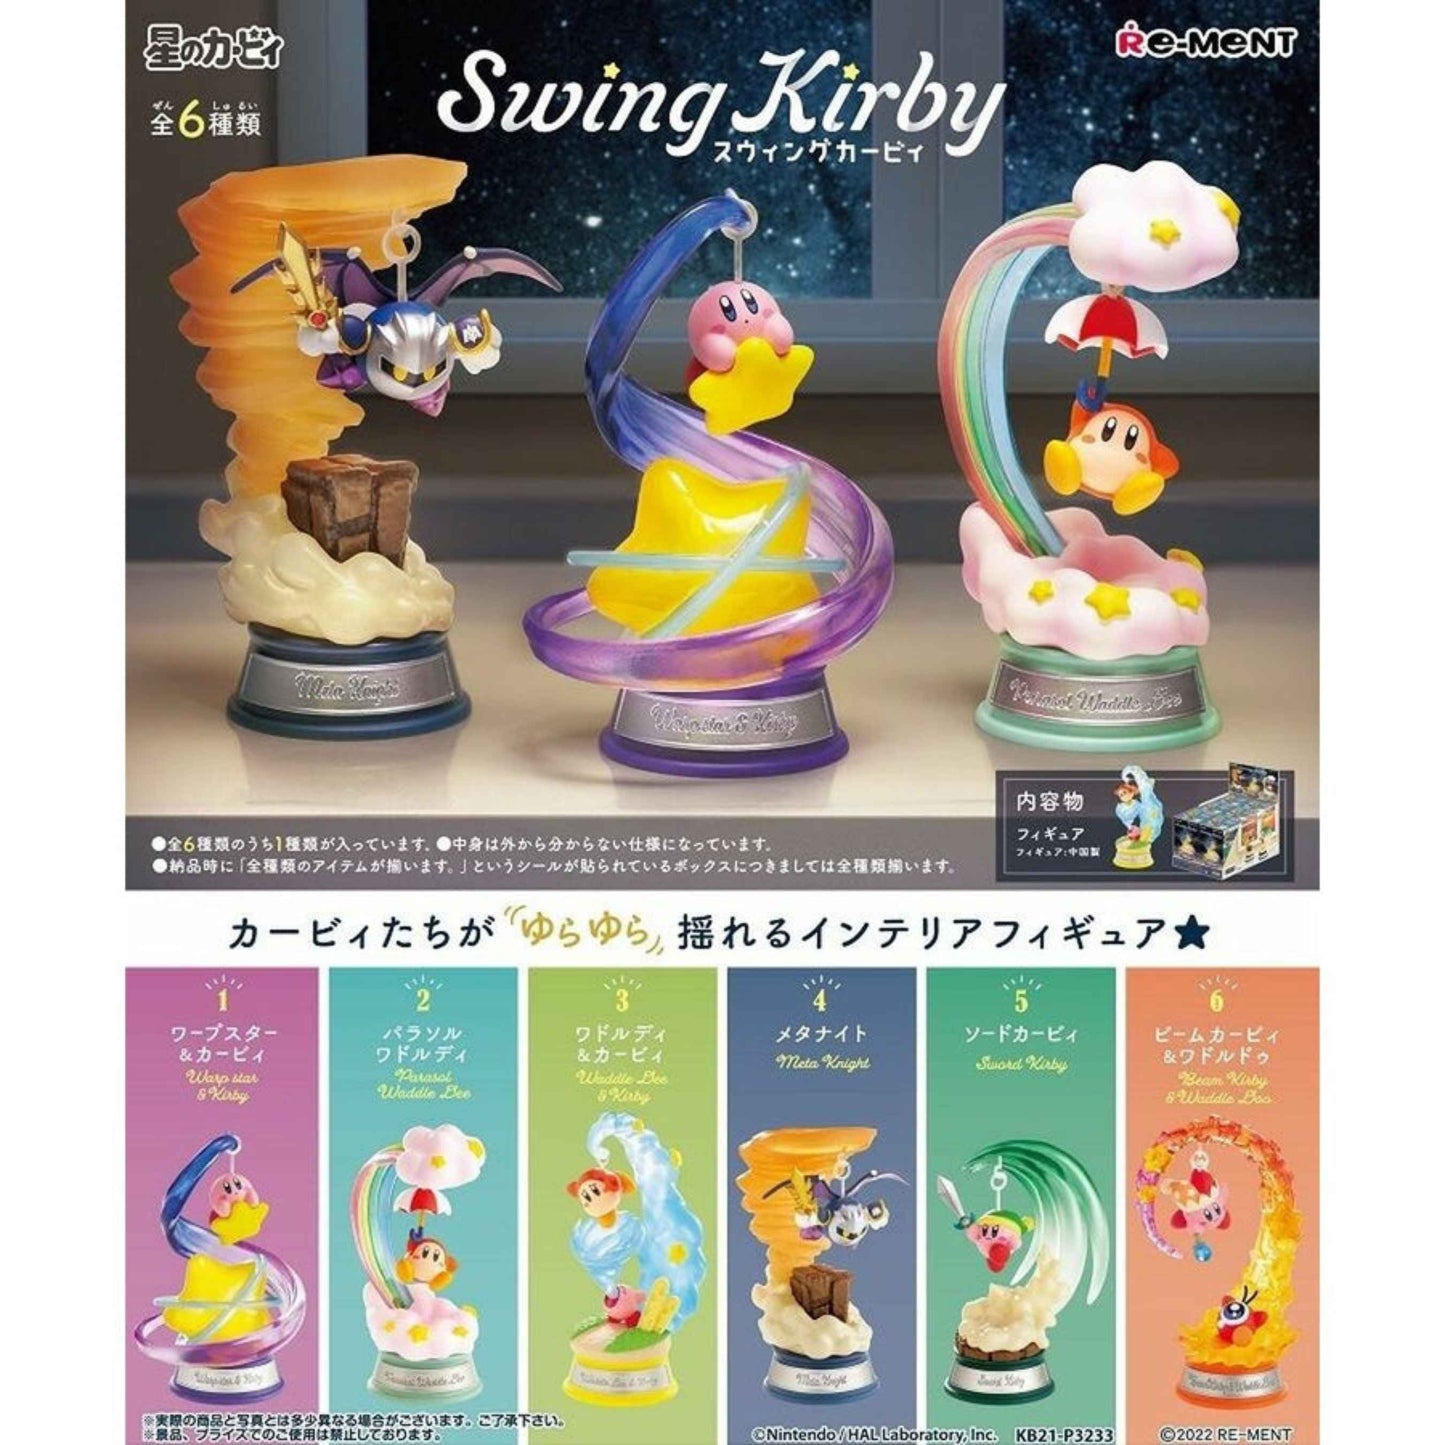 Re-ment: Swing Kirby Series Blind Box - Whole Set of 6